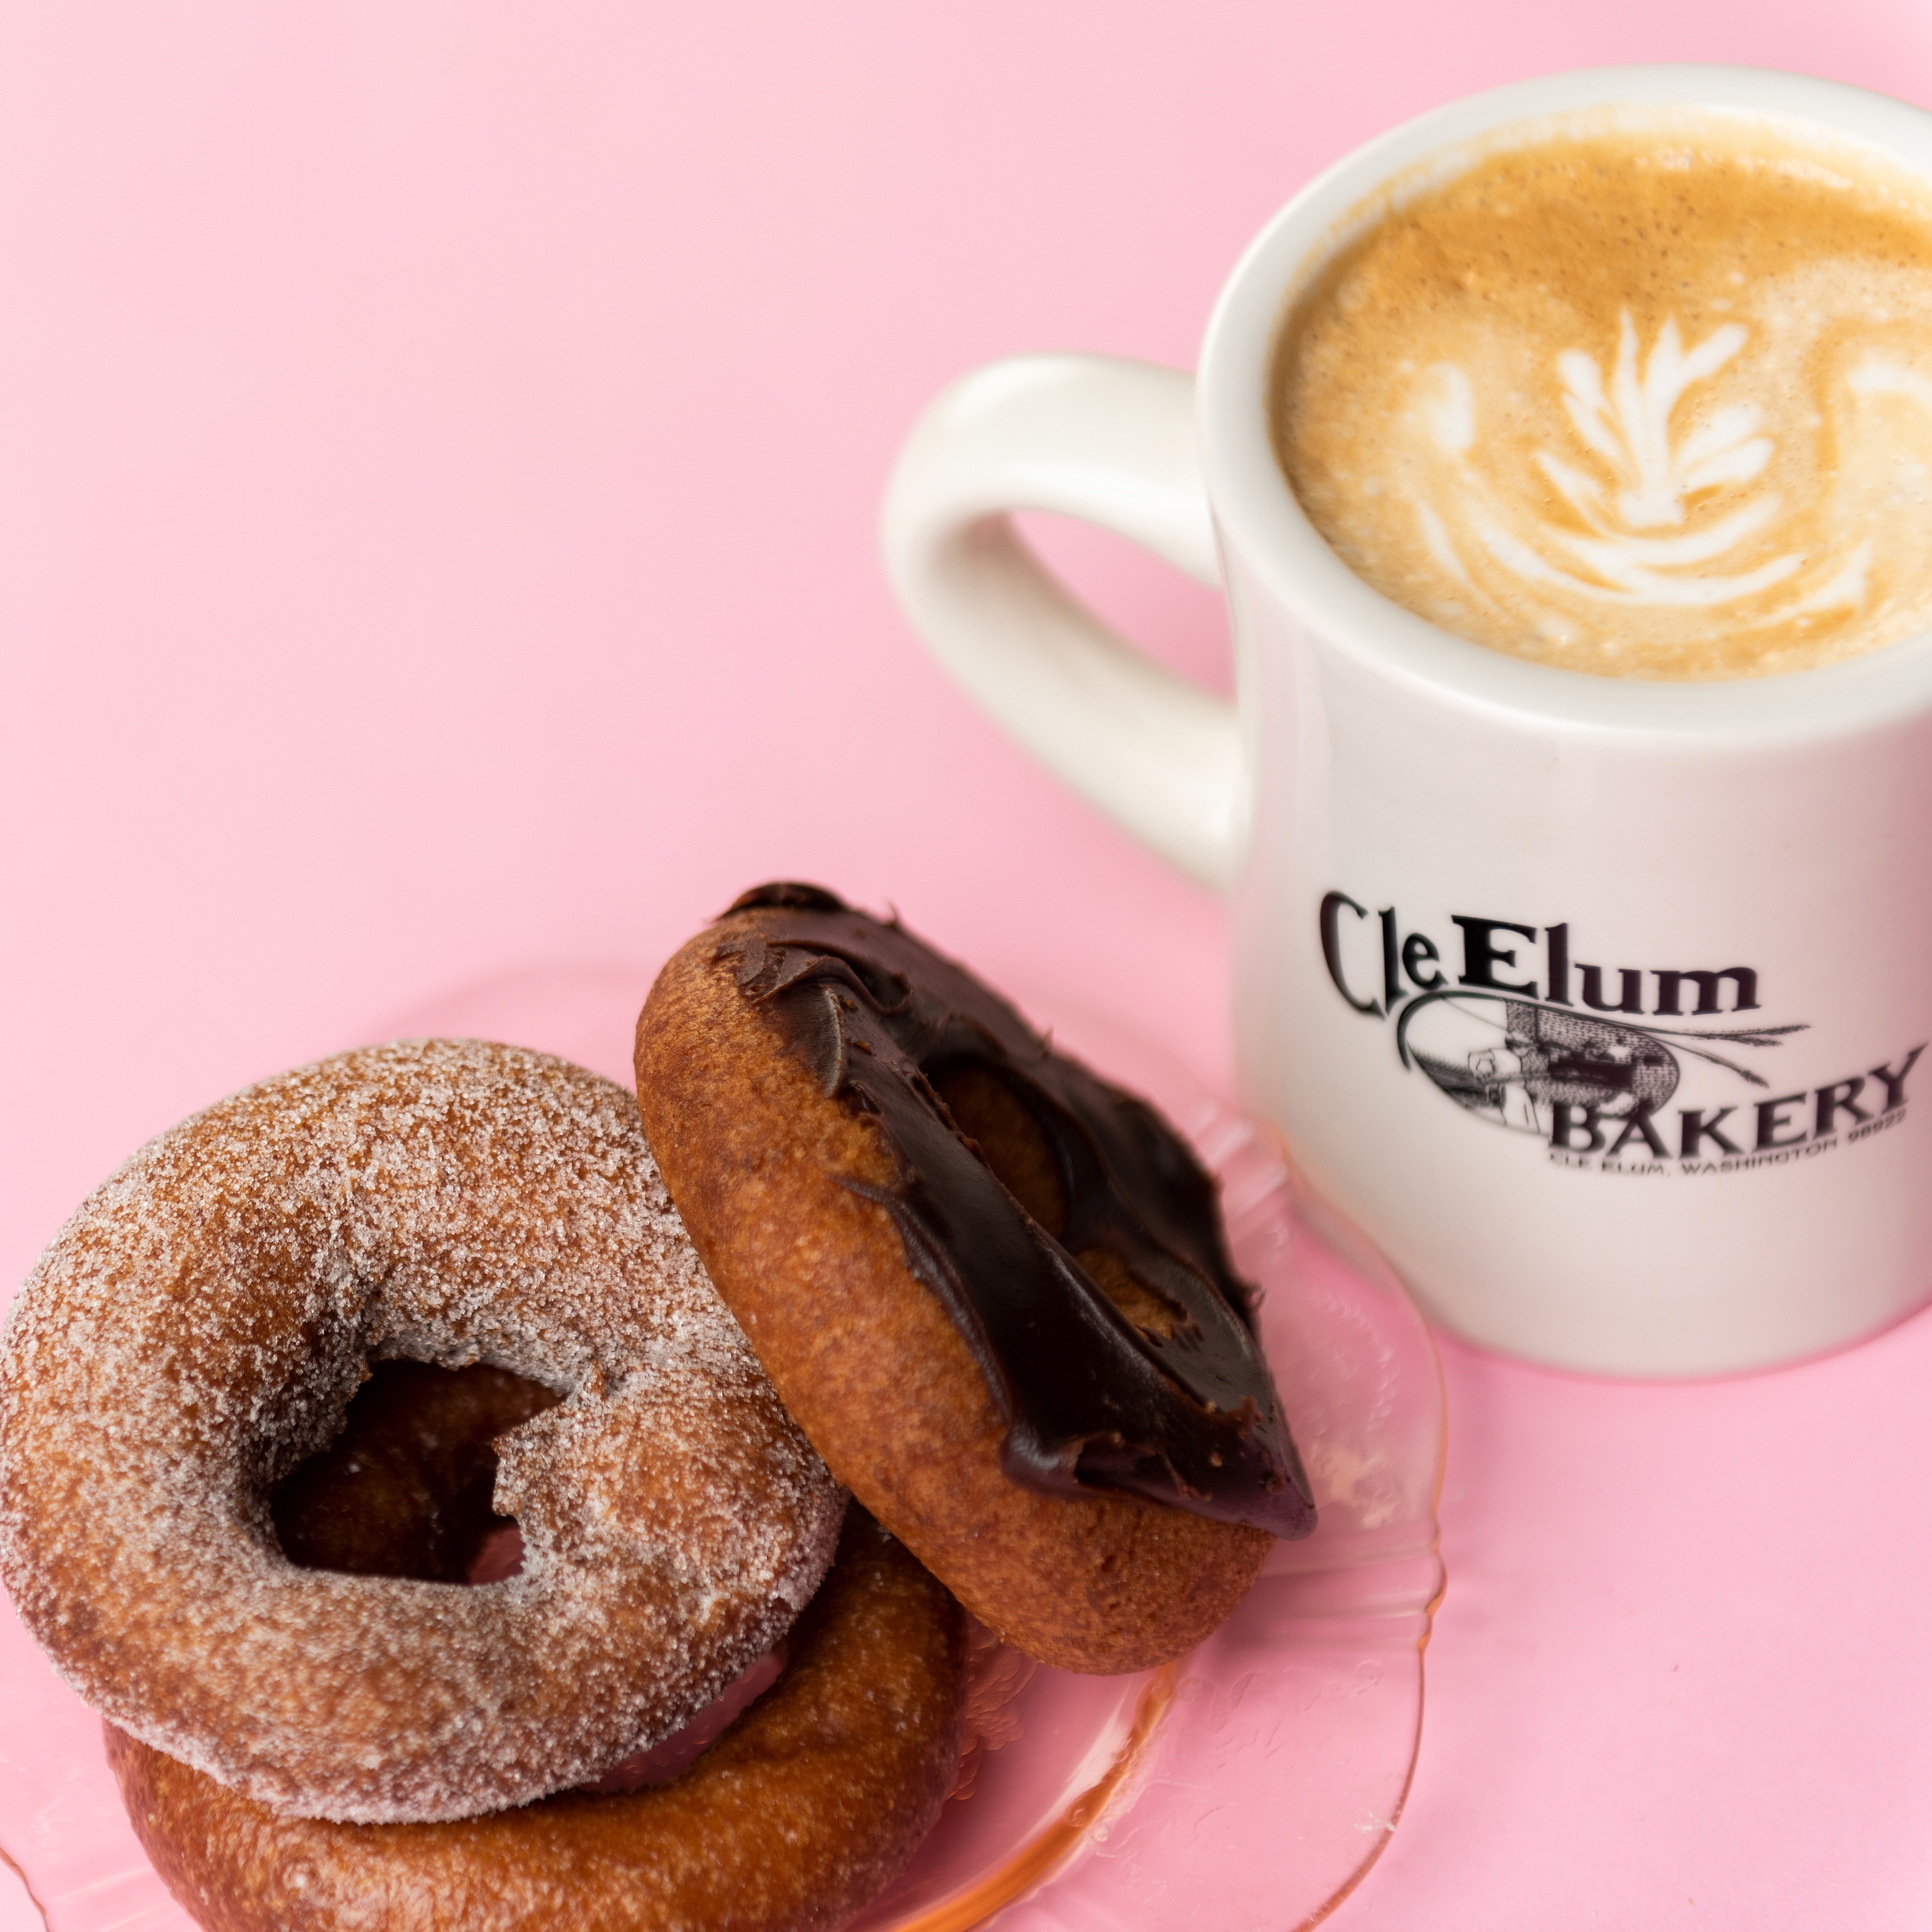 Donuts and coffee at Cle Elum Bakery, commercial photography by Mary Maletzke